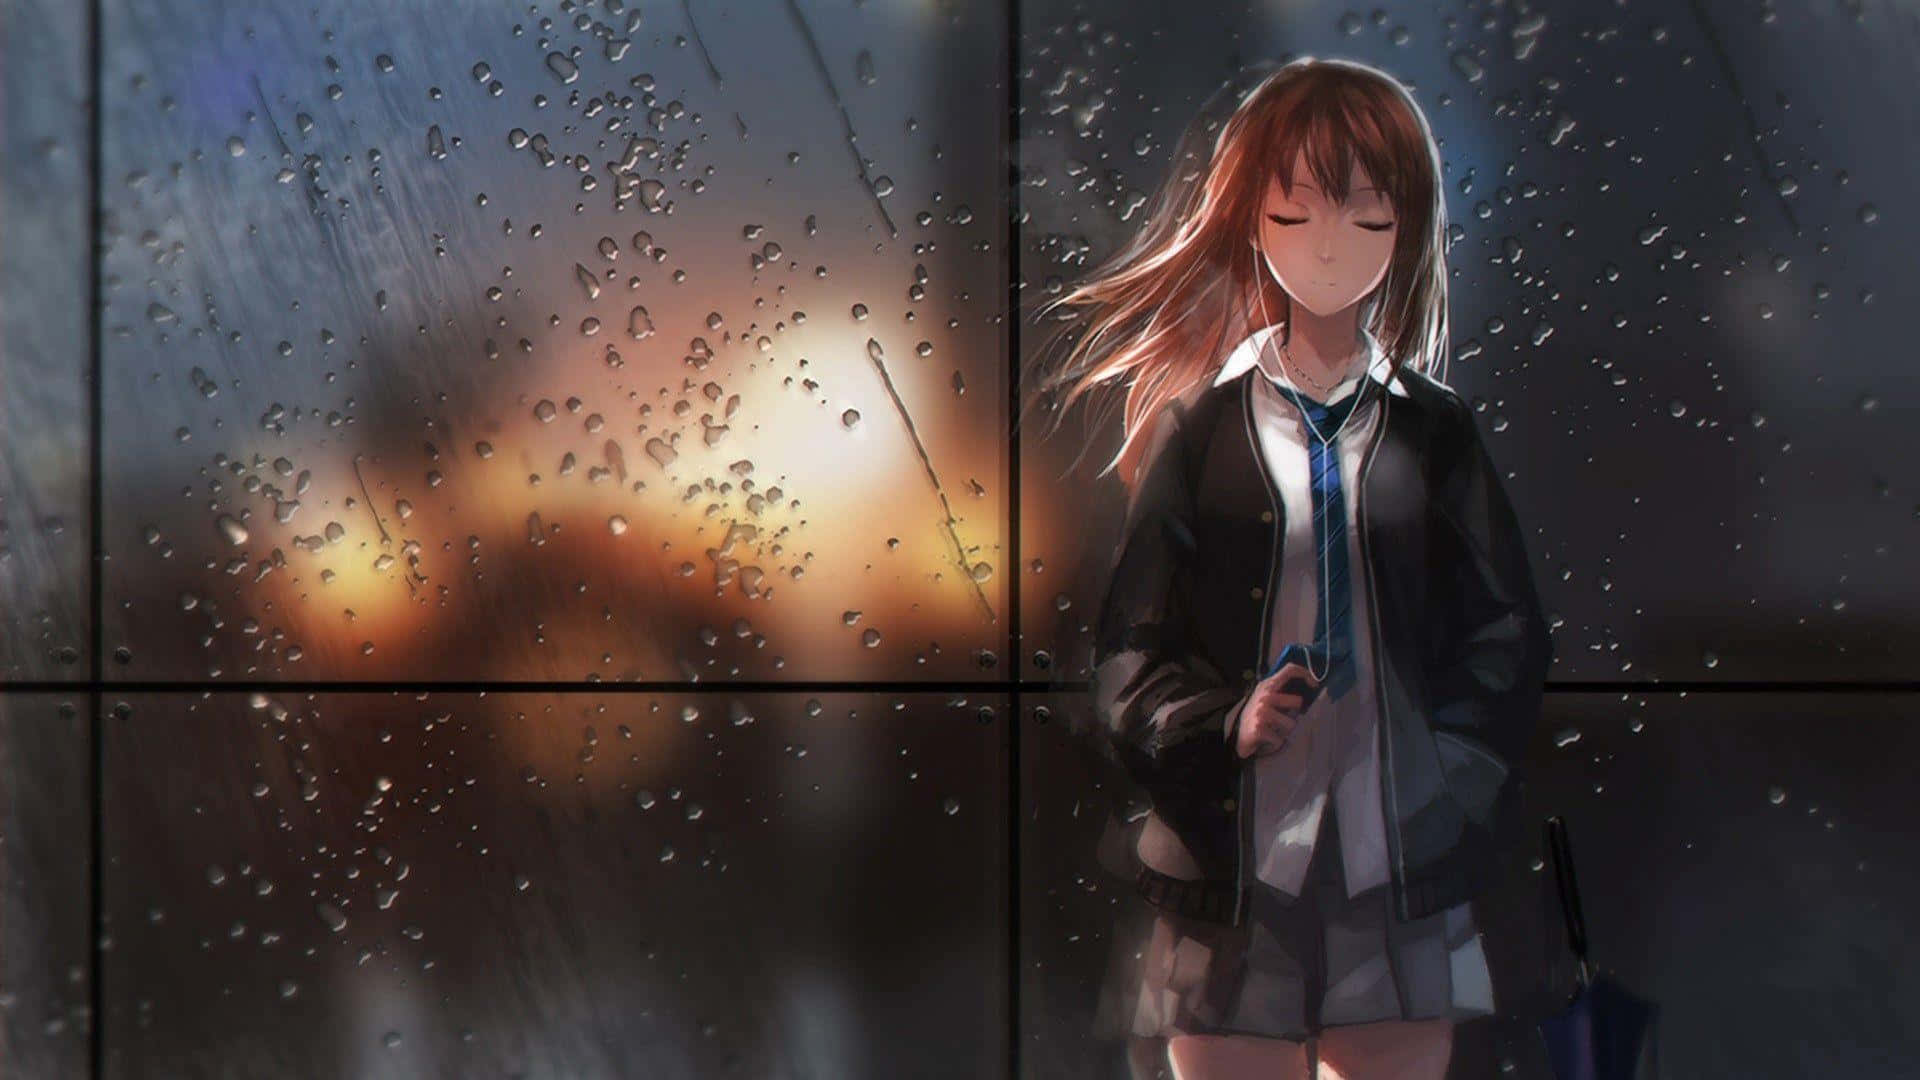 "Bravely Staring Into a Stormy Anime" Wallpaper